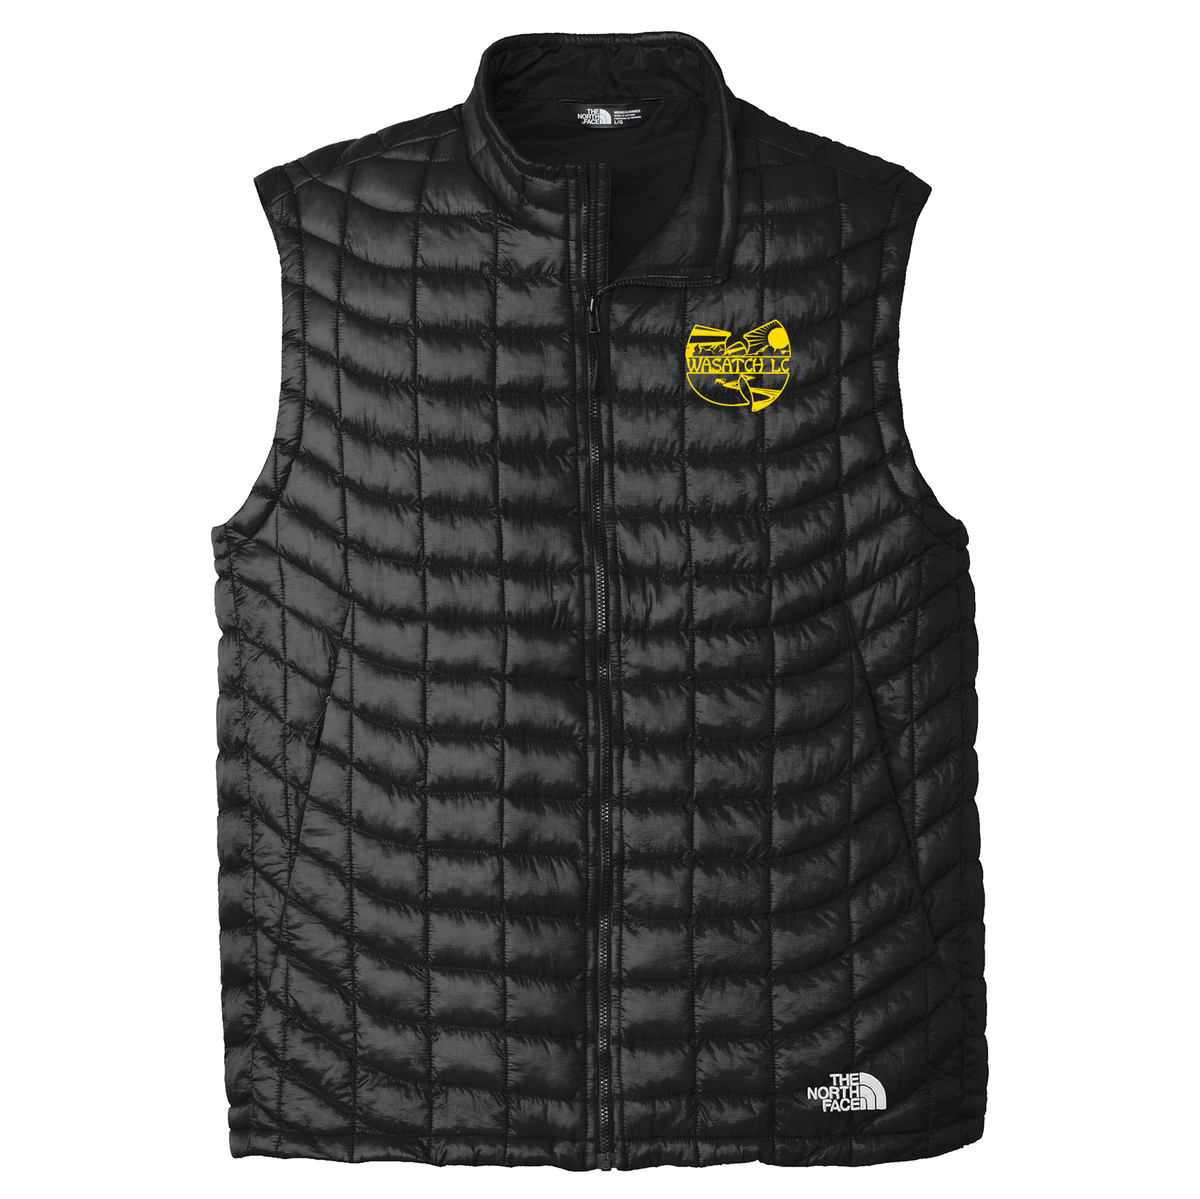 Wasatch LC The North Face Thermoball Vest